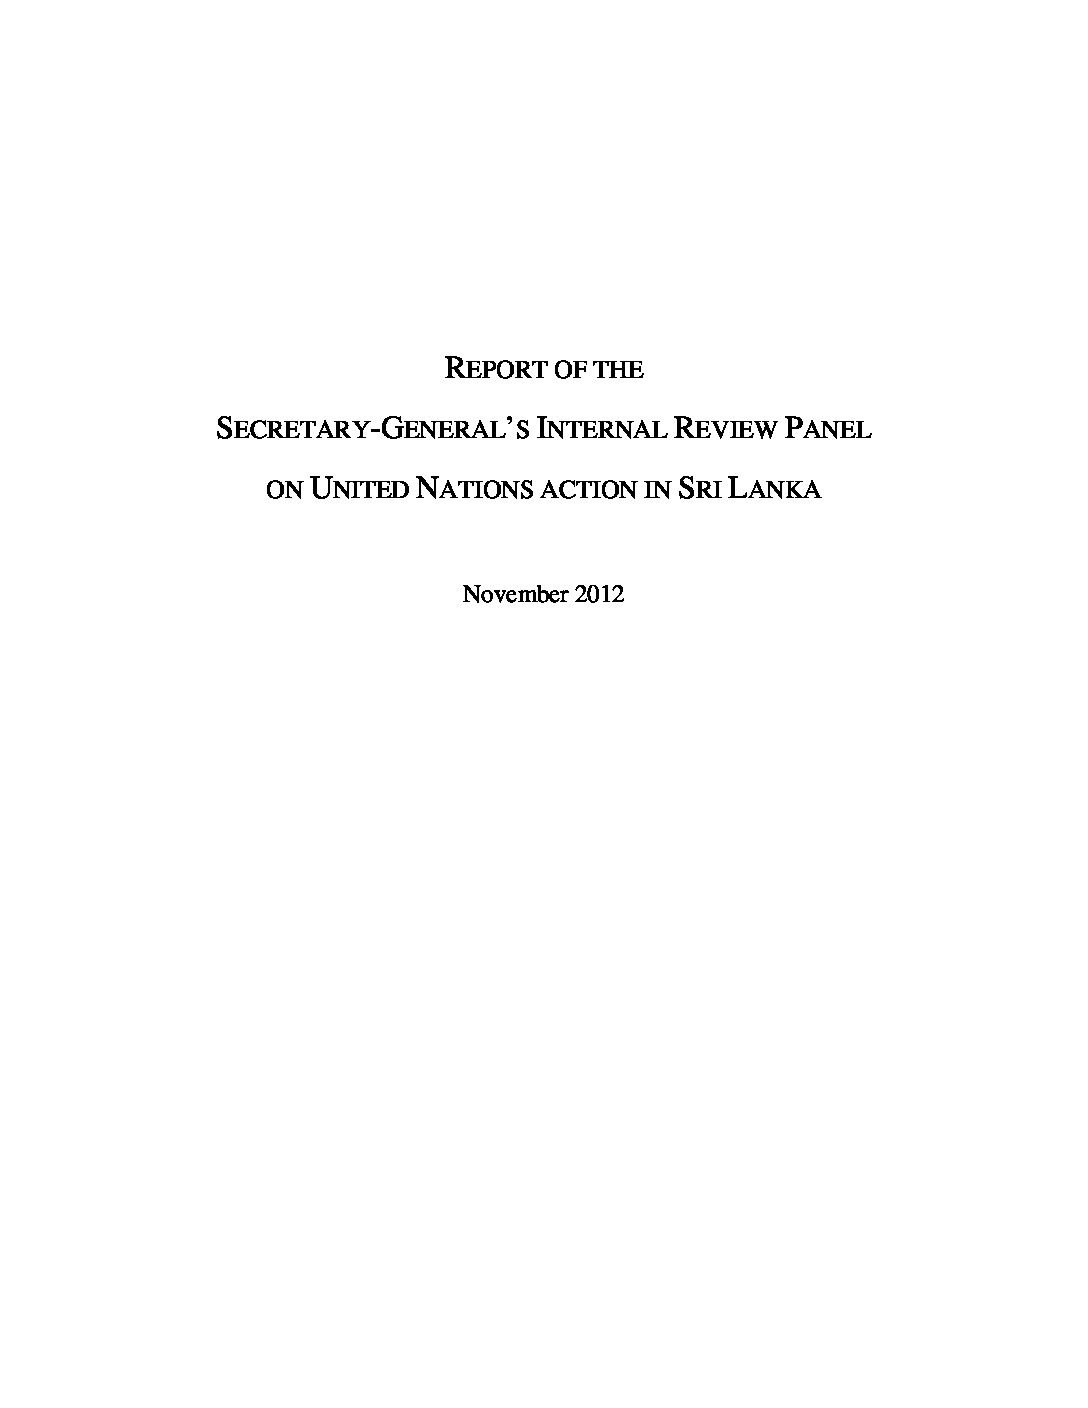 Photo of Report of the Secretary-General’s Internal Review Panel on UN Action in Sri Lanka